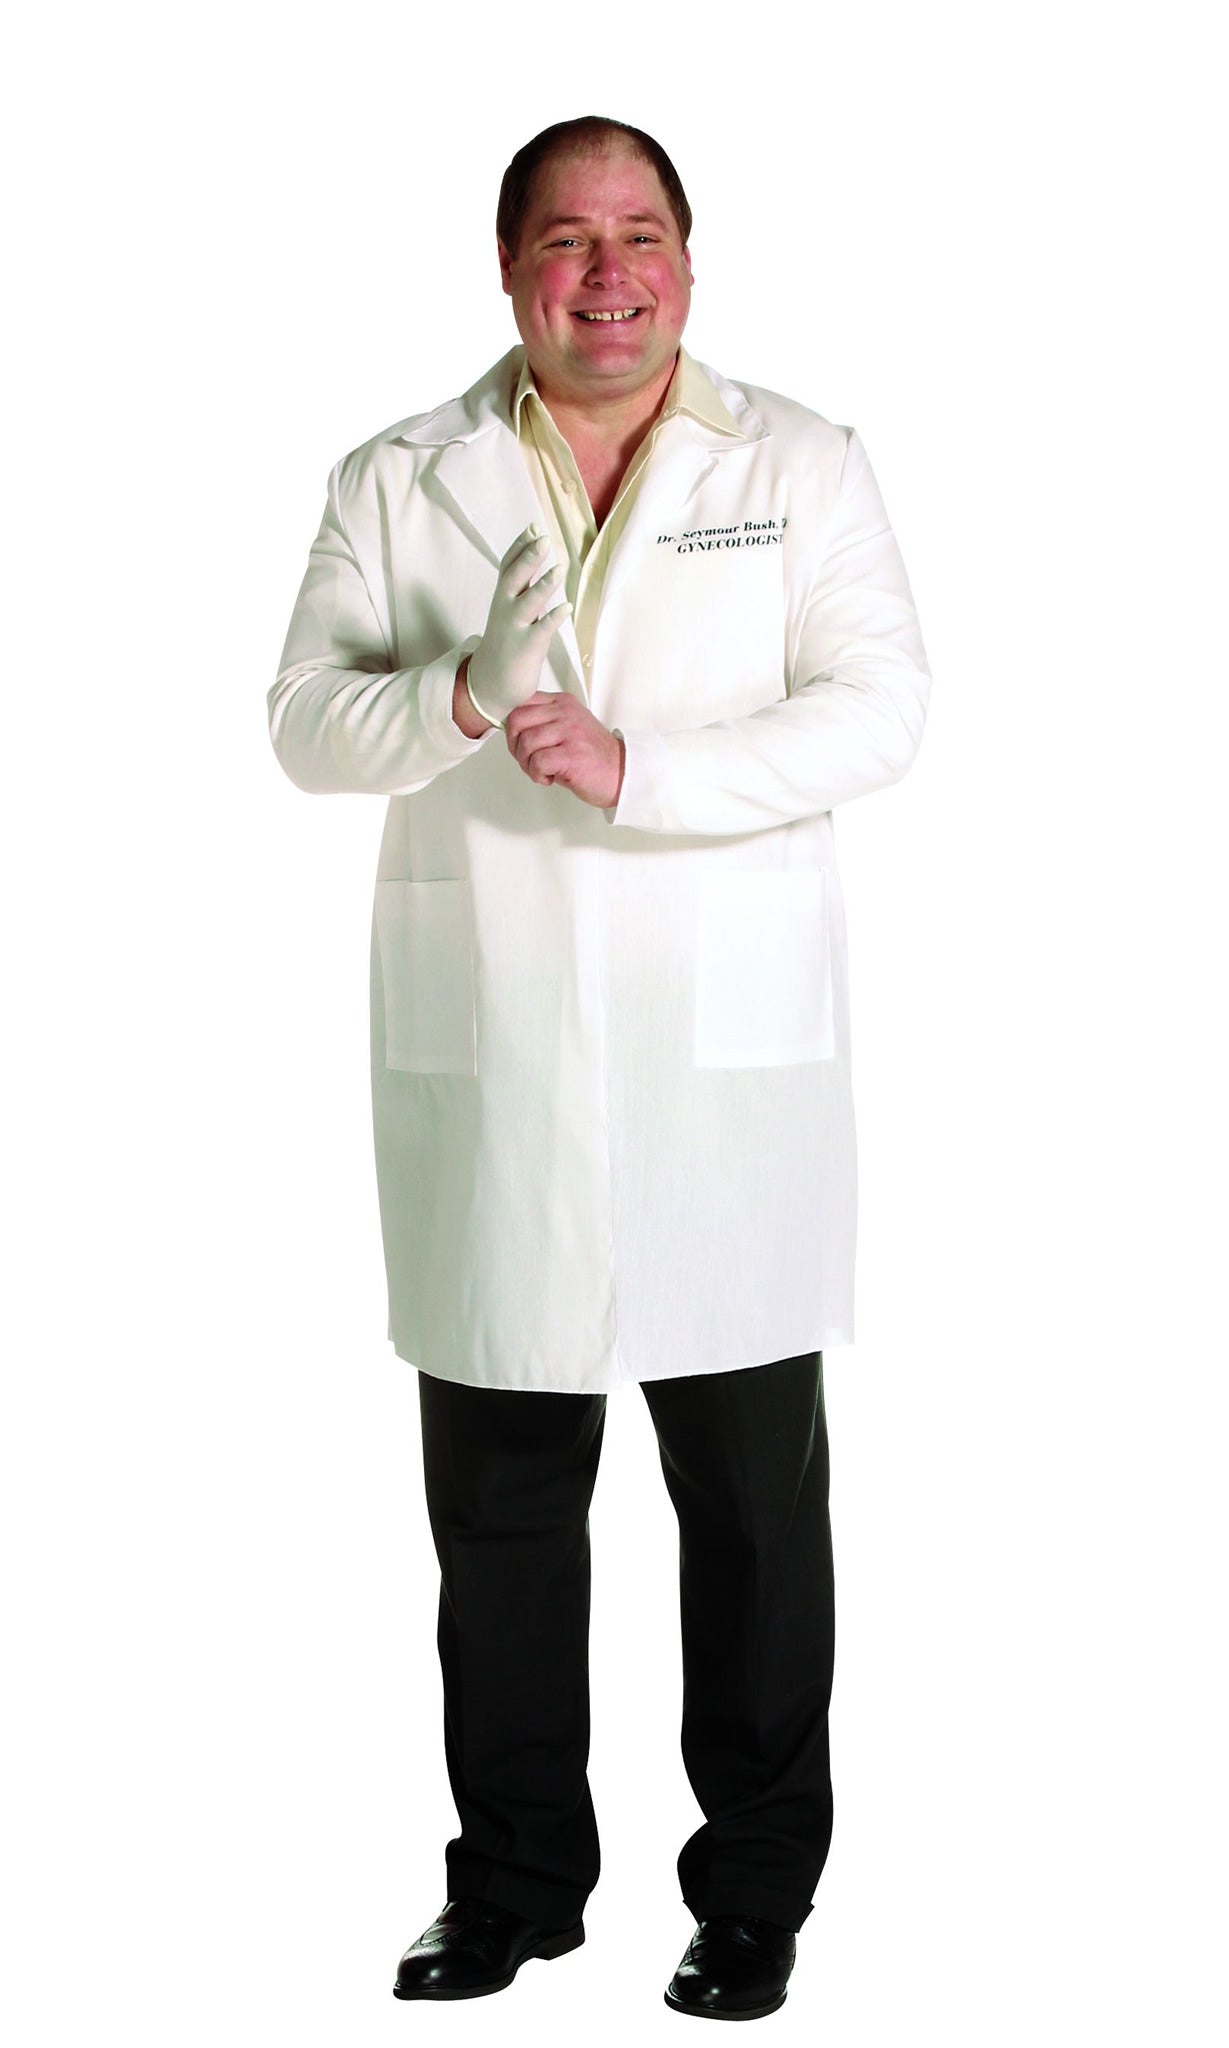 Lab coat named Seymour Bush Gynaecologist, with disposable gloves